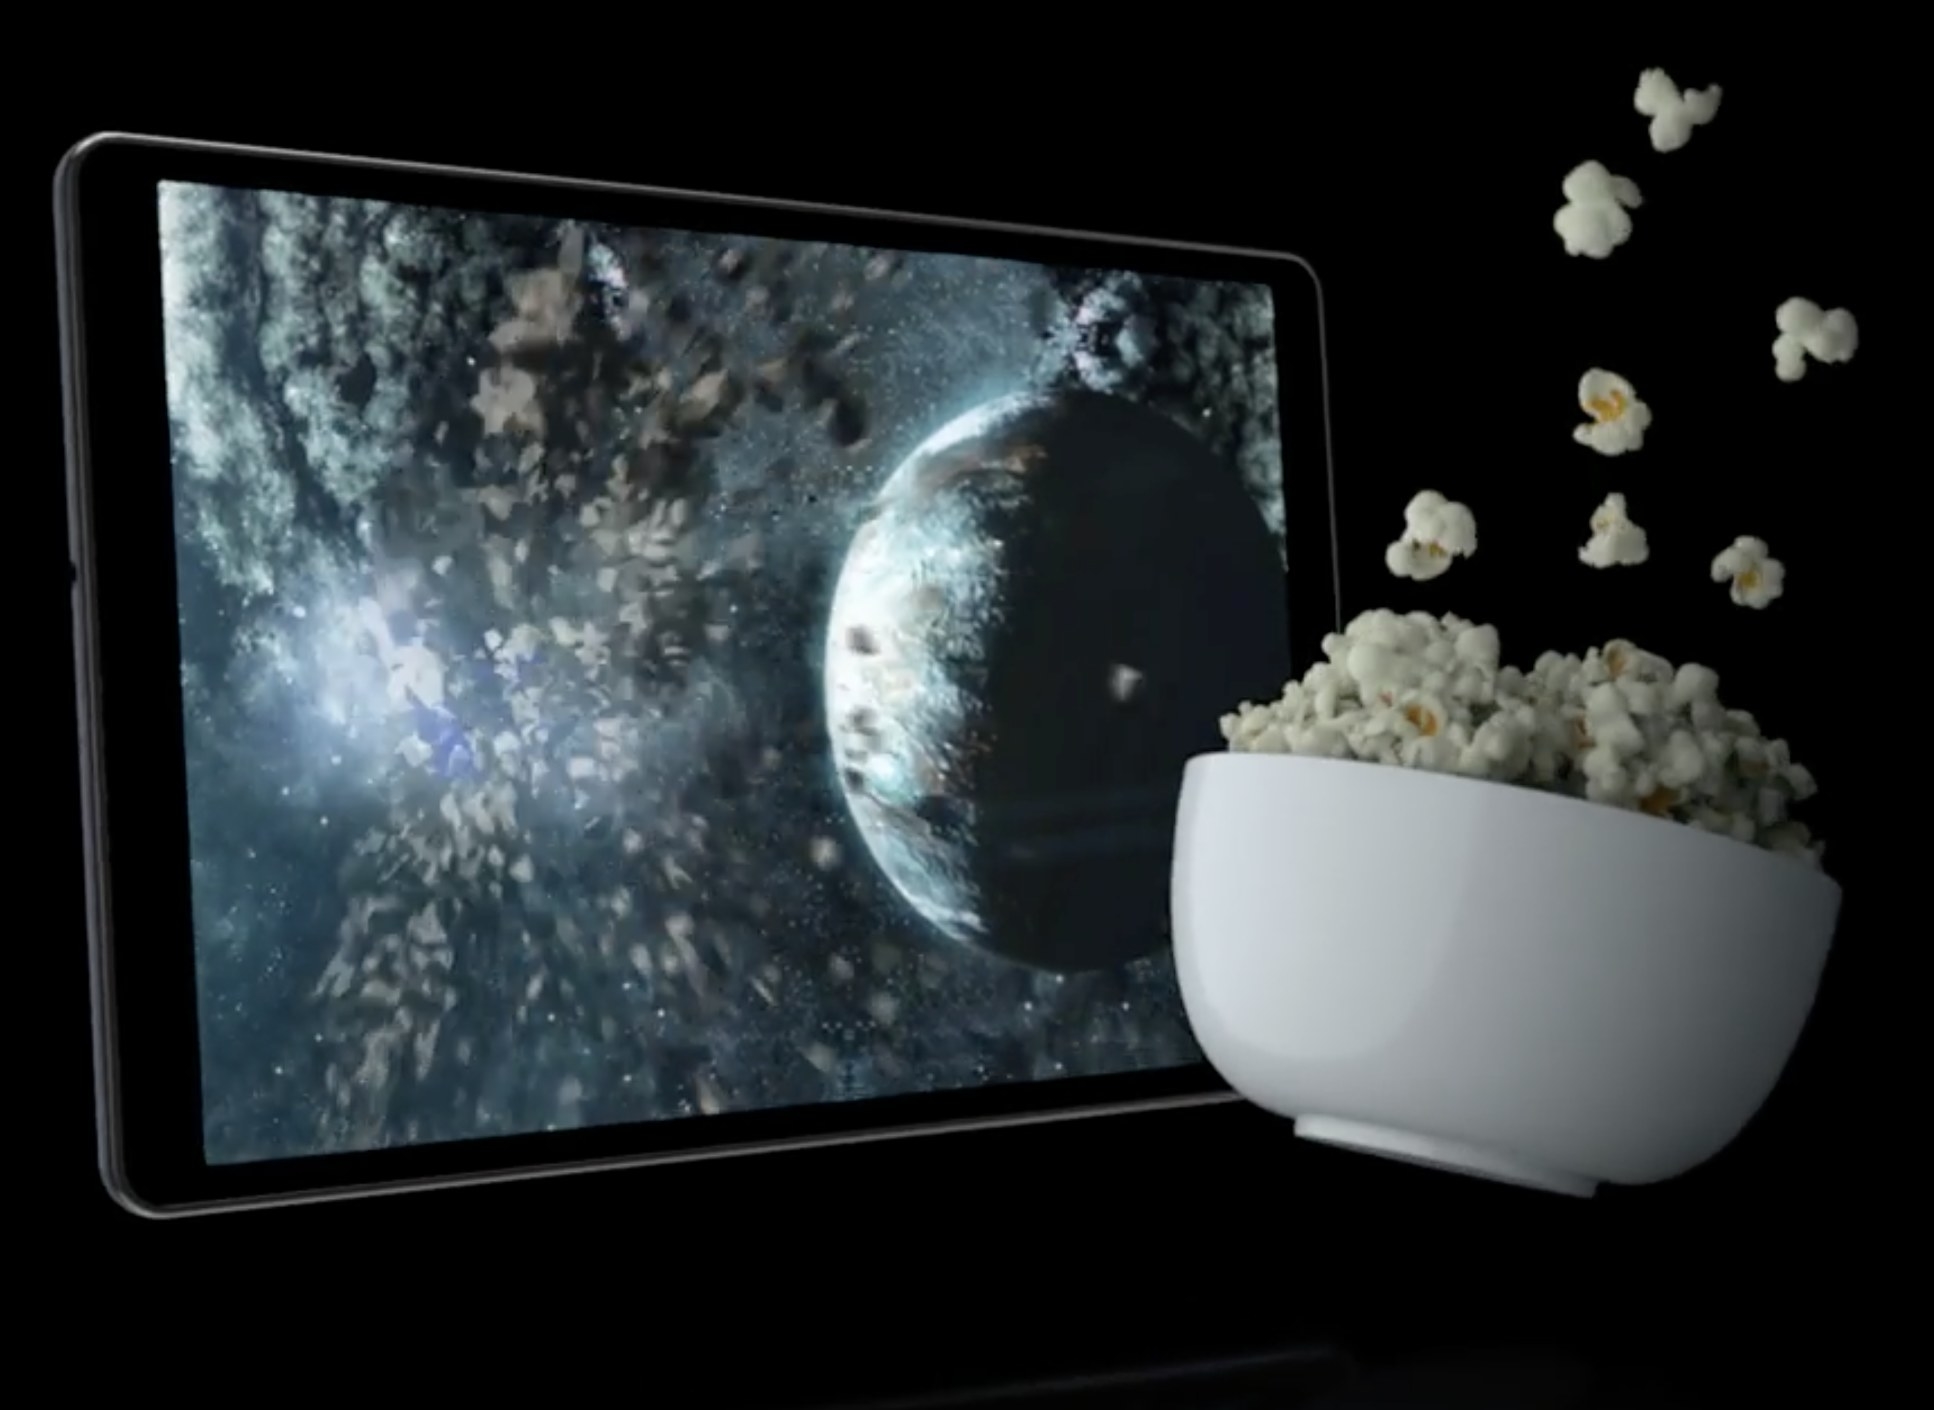 The tablet next to popcorn